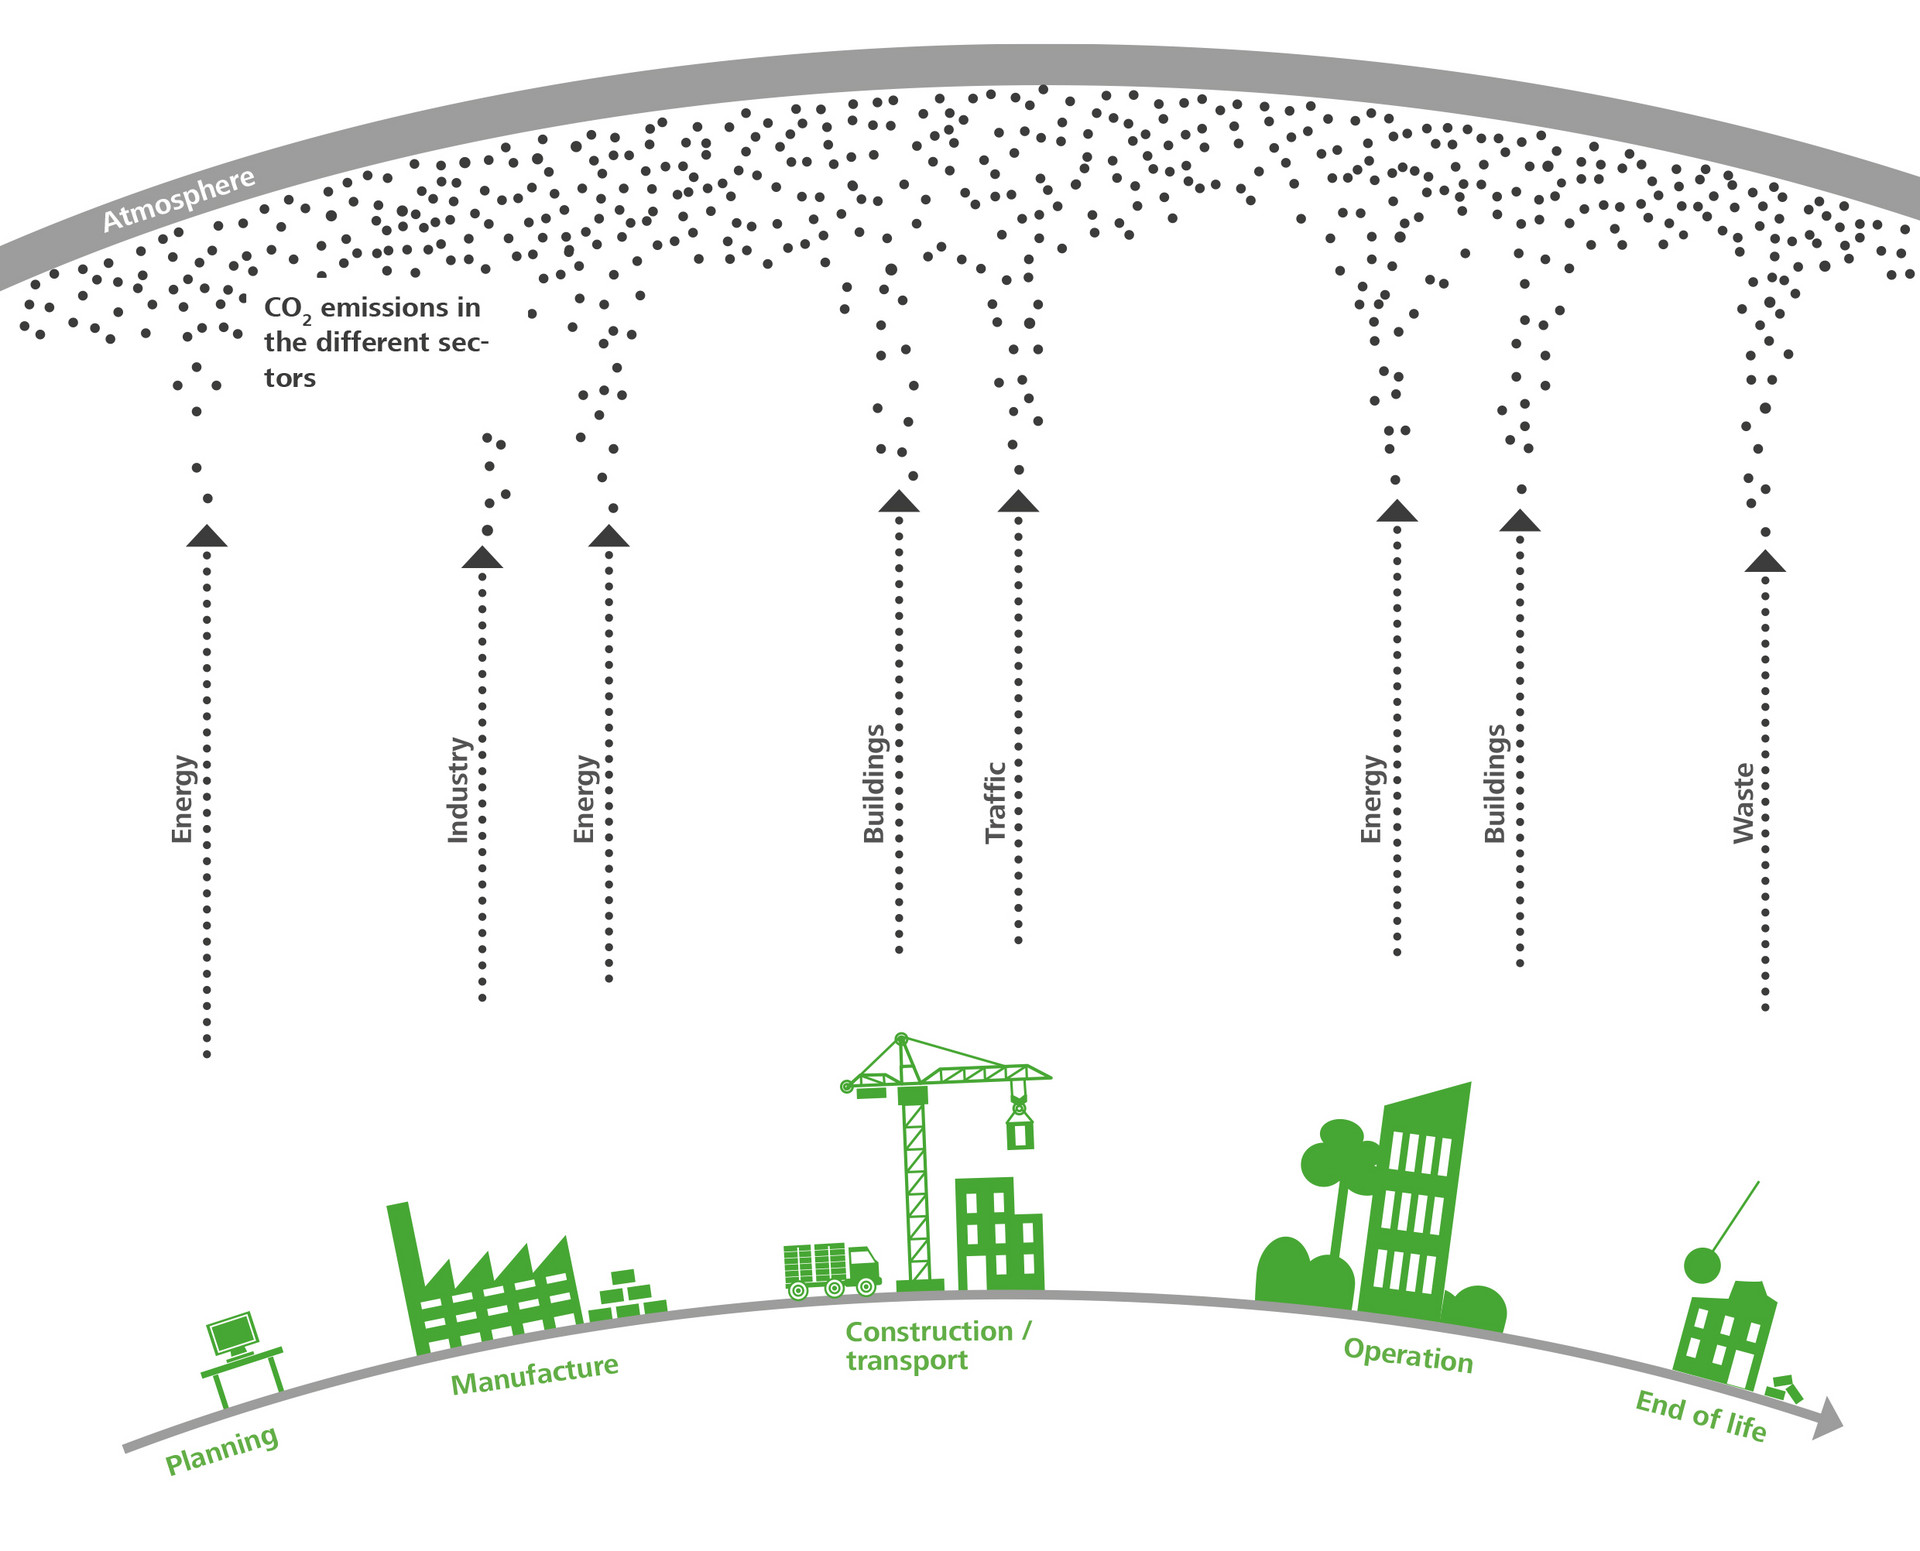 The illustration visualises the greenhouse gas emissions of a building during its life cycle and the different sectors to which they are assigned.